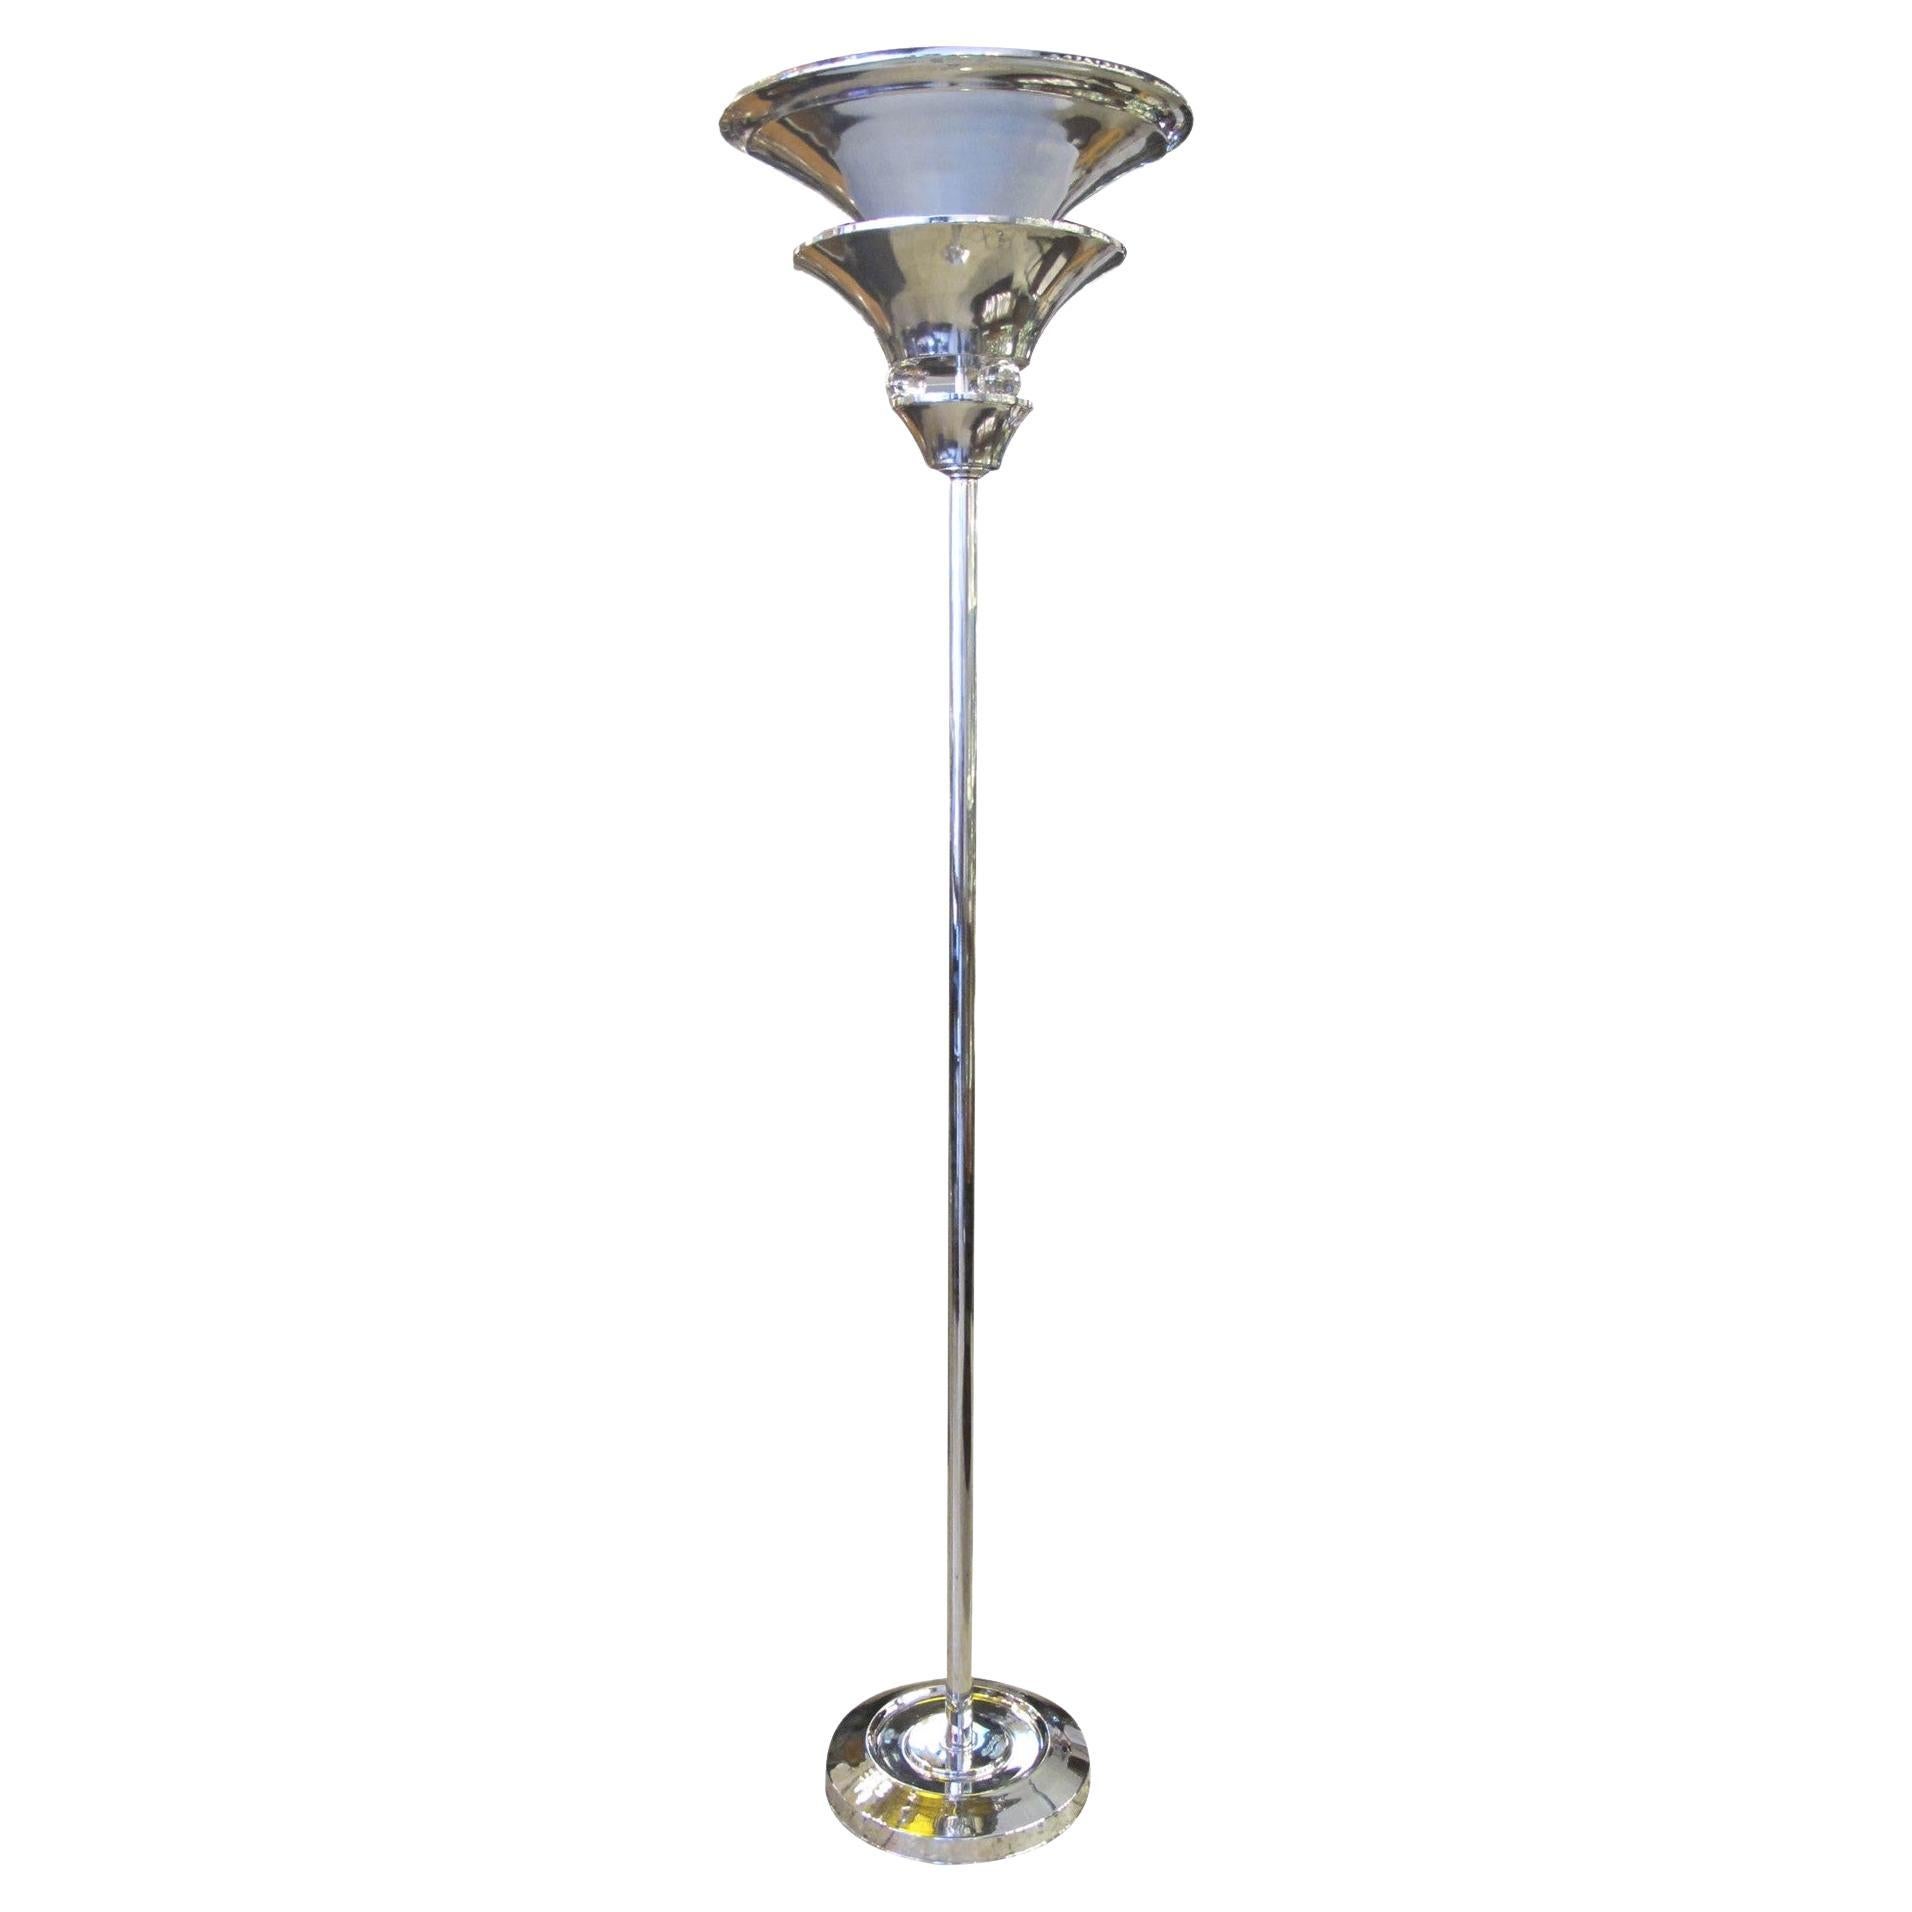 Unusual Floor Lamp Art Deco 1920, German, Materials: Chrome and Glass For Sale